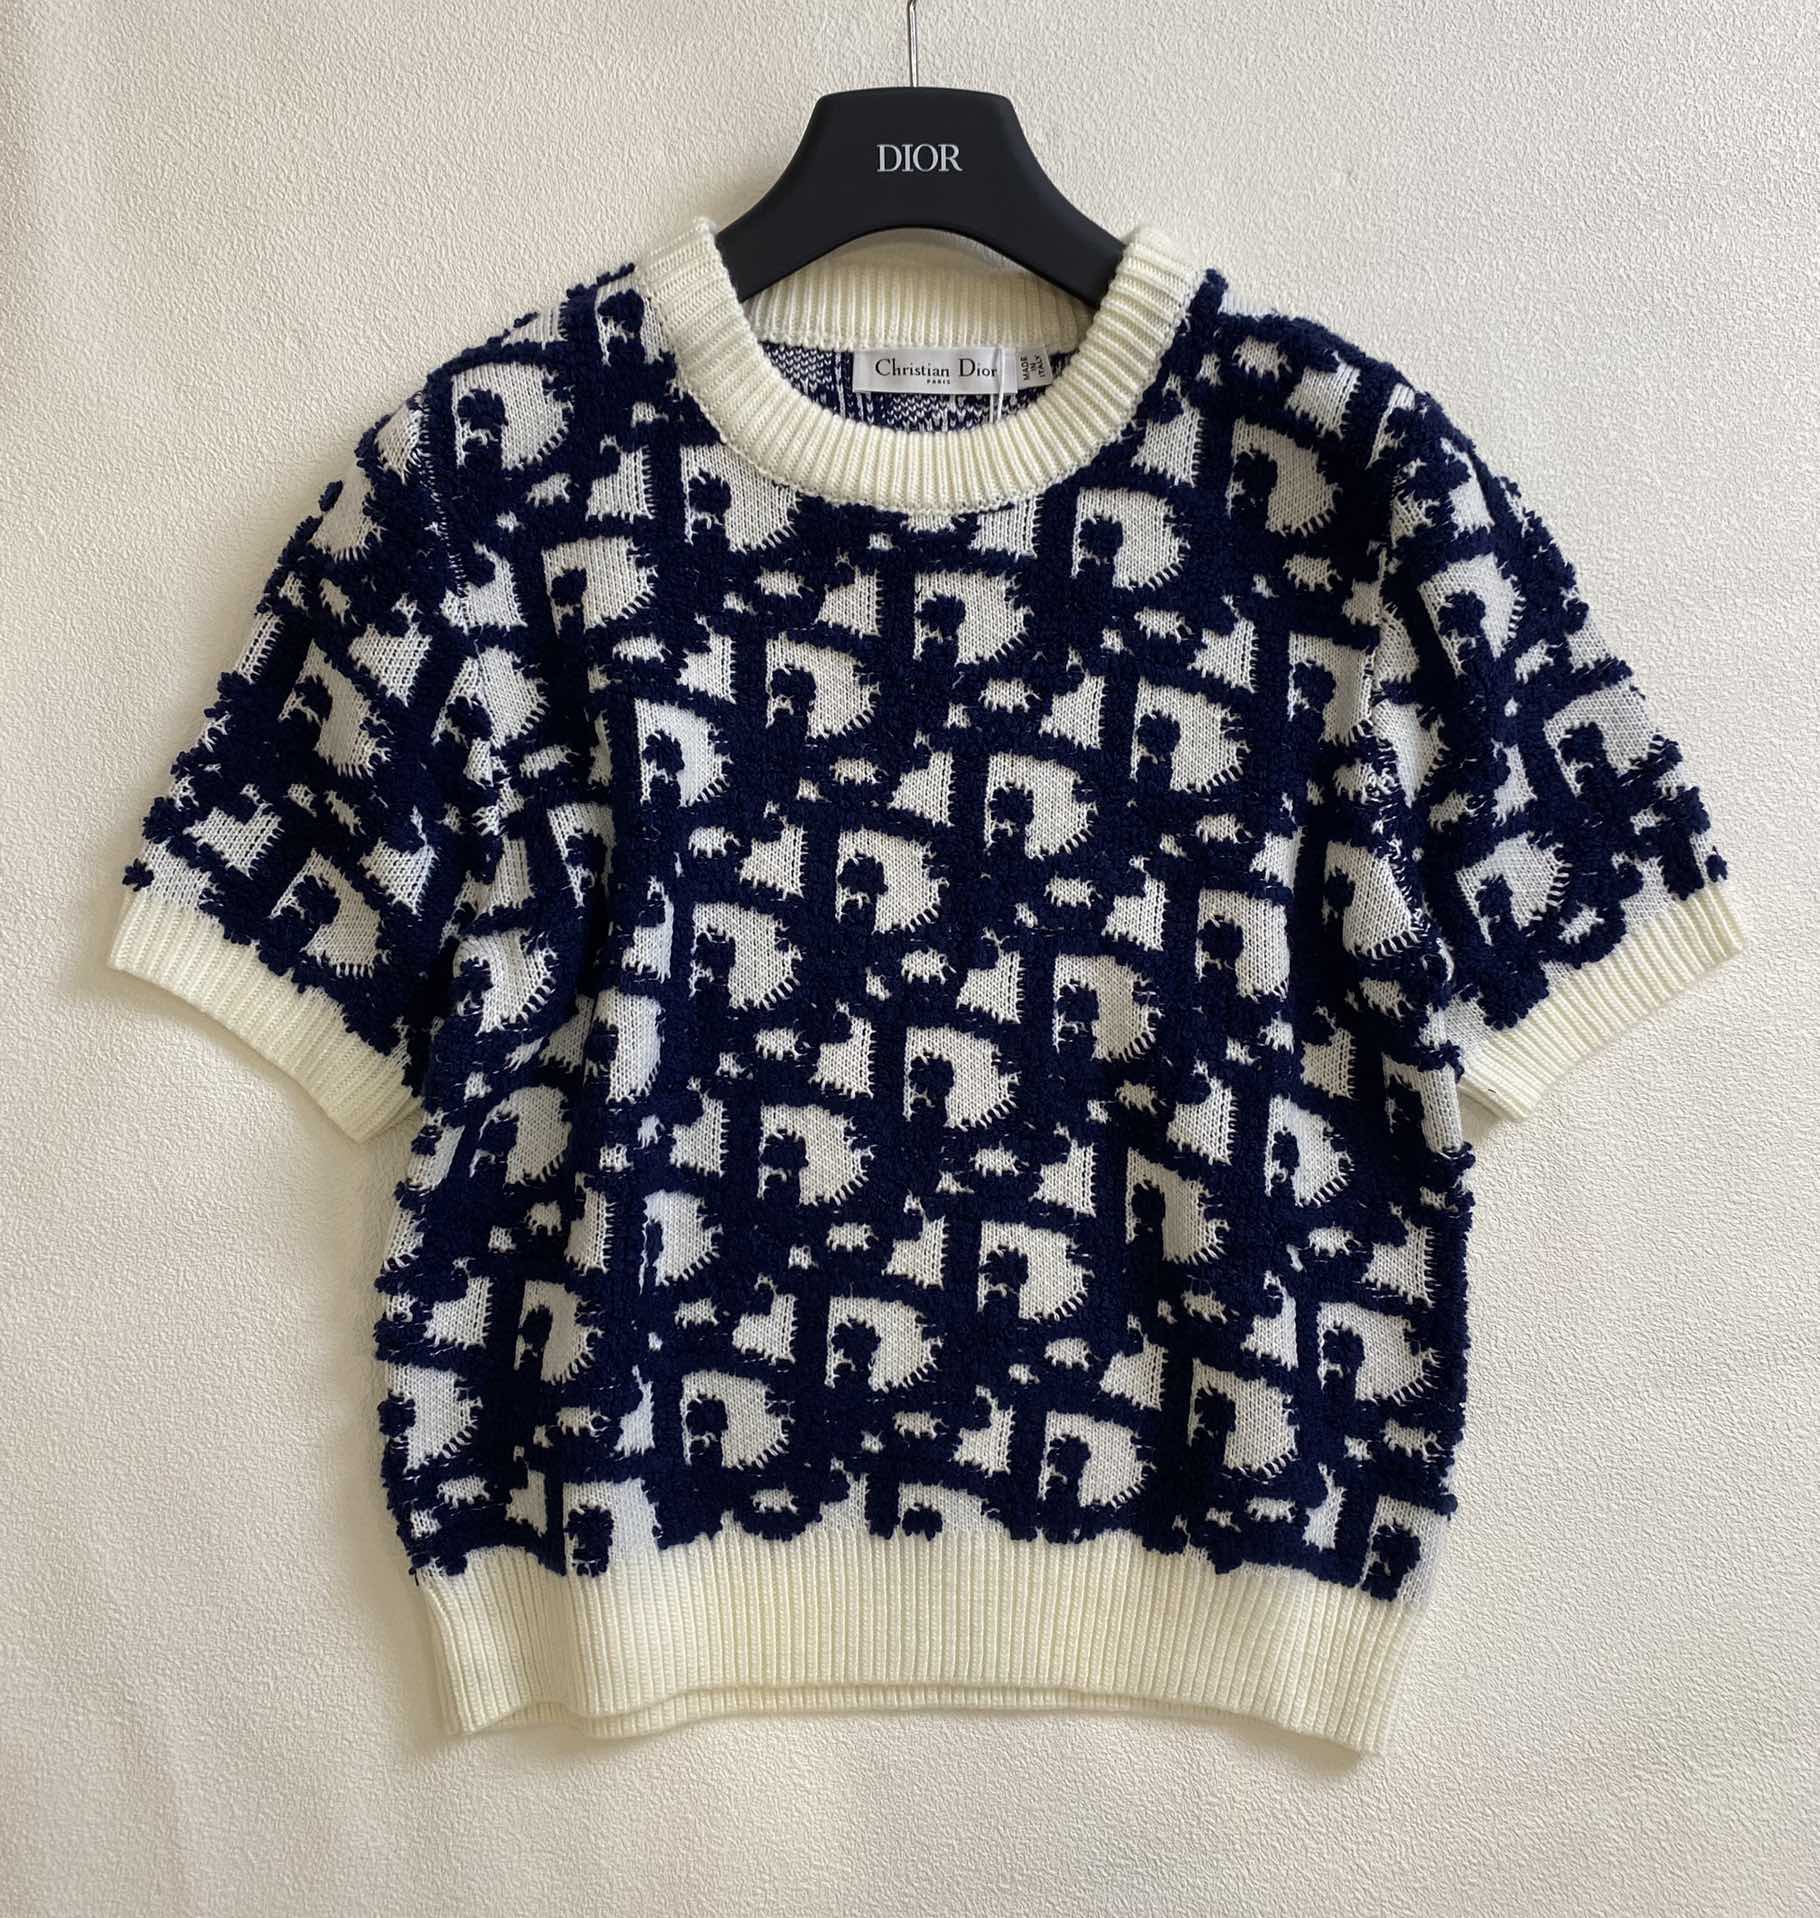 Replica DIOR Vintage Holiday Time Blue/White Floral Print Pullover Sweater size Large